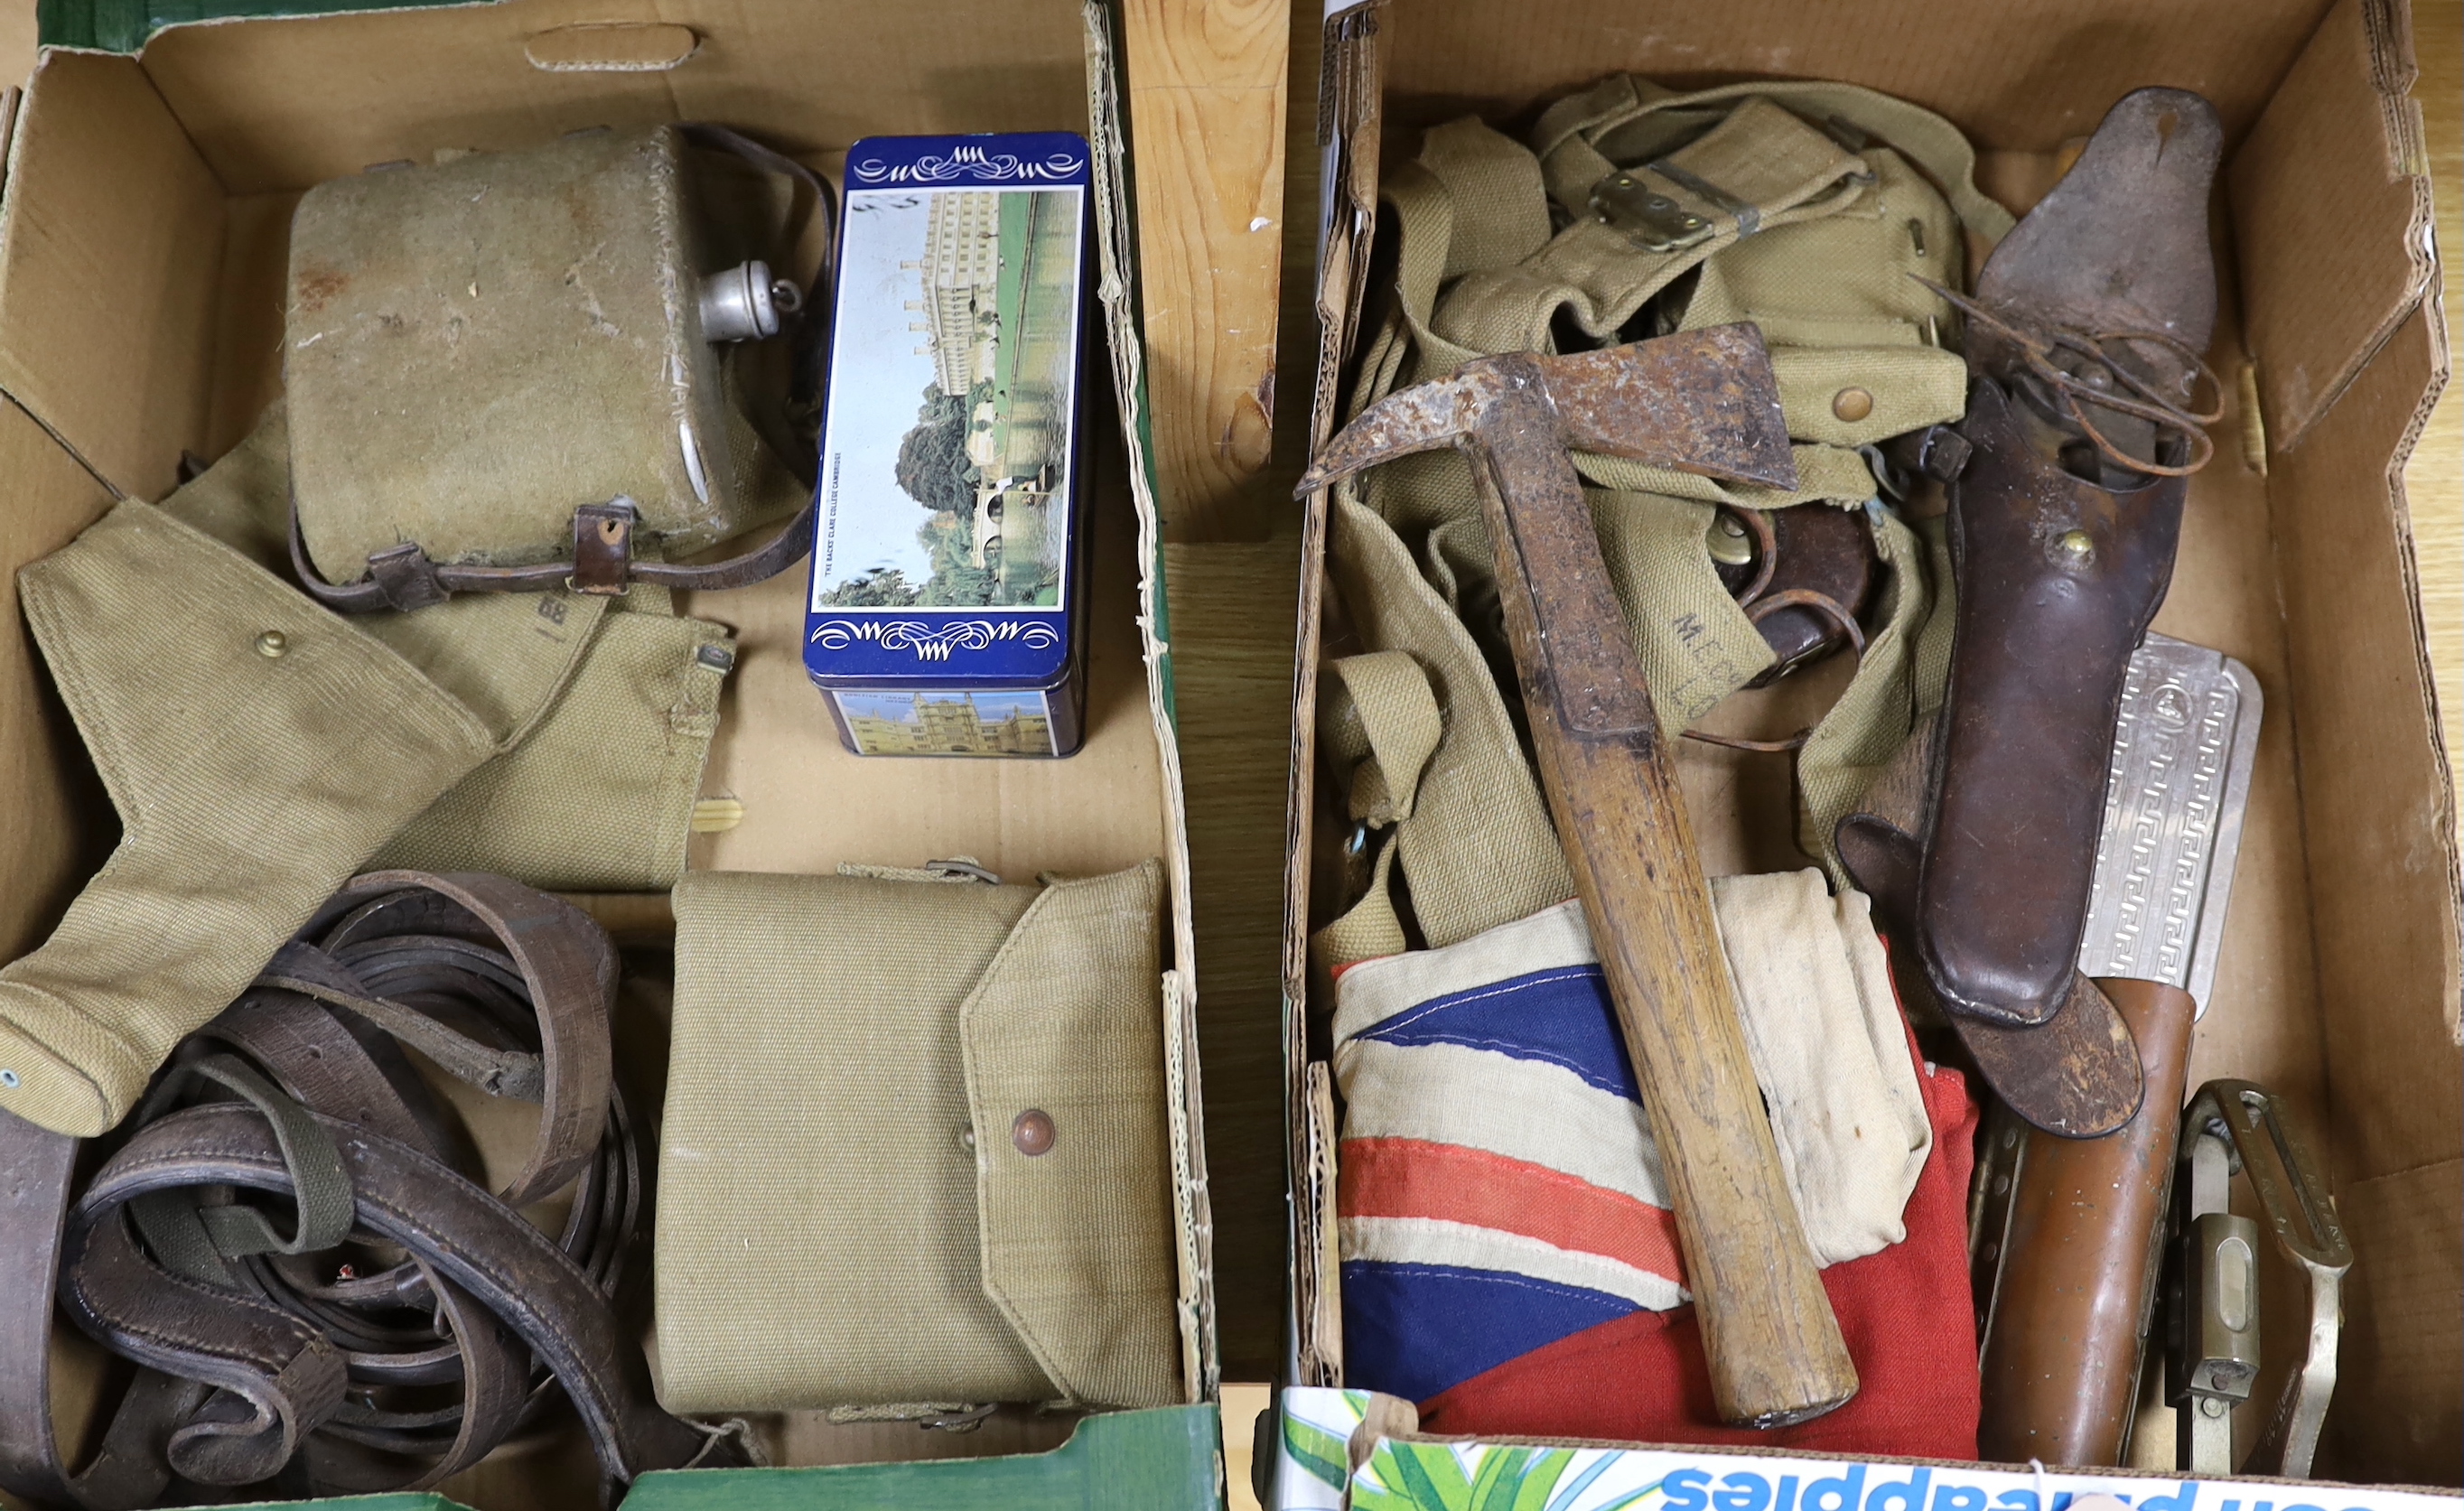 A collection of militaria including a union flag, gunners sight, camouflage webbing, a water bottle, an axe, a bosun’s whistle, and other items